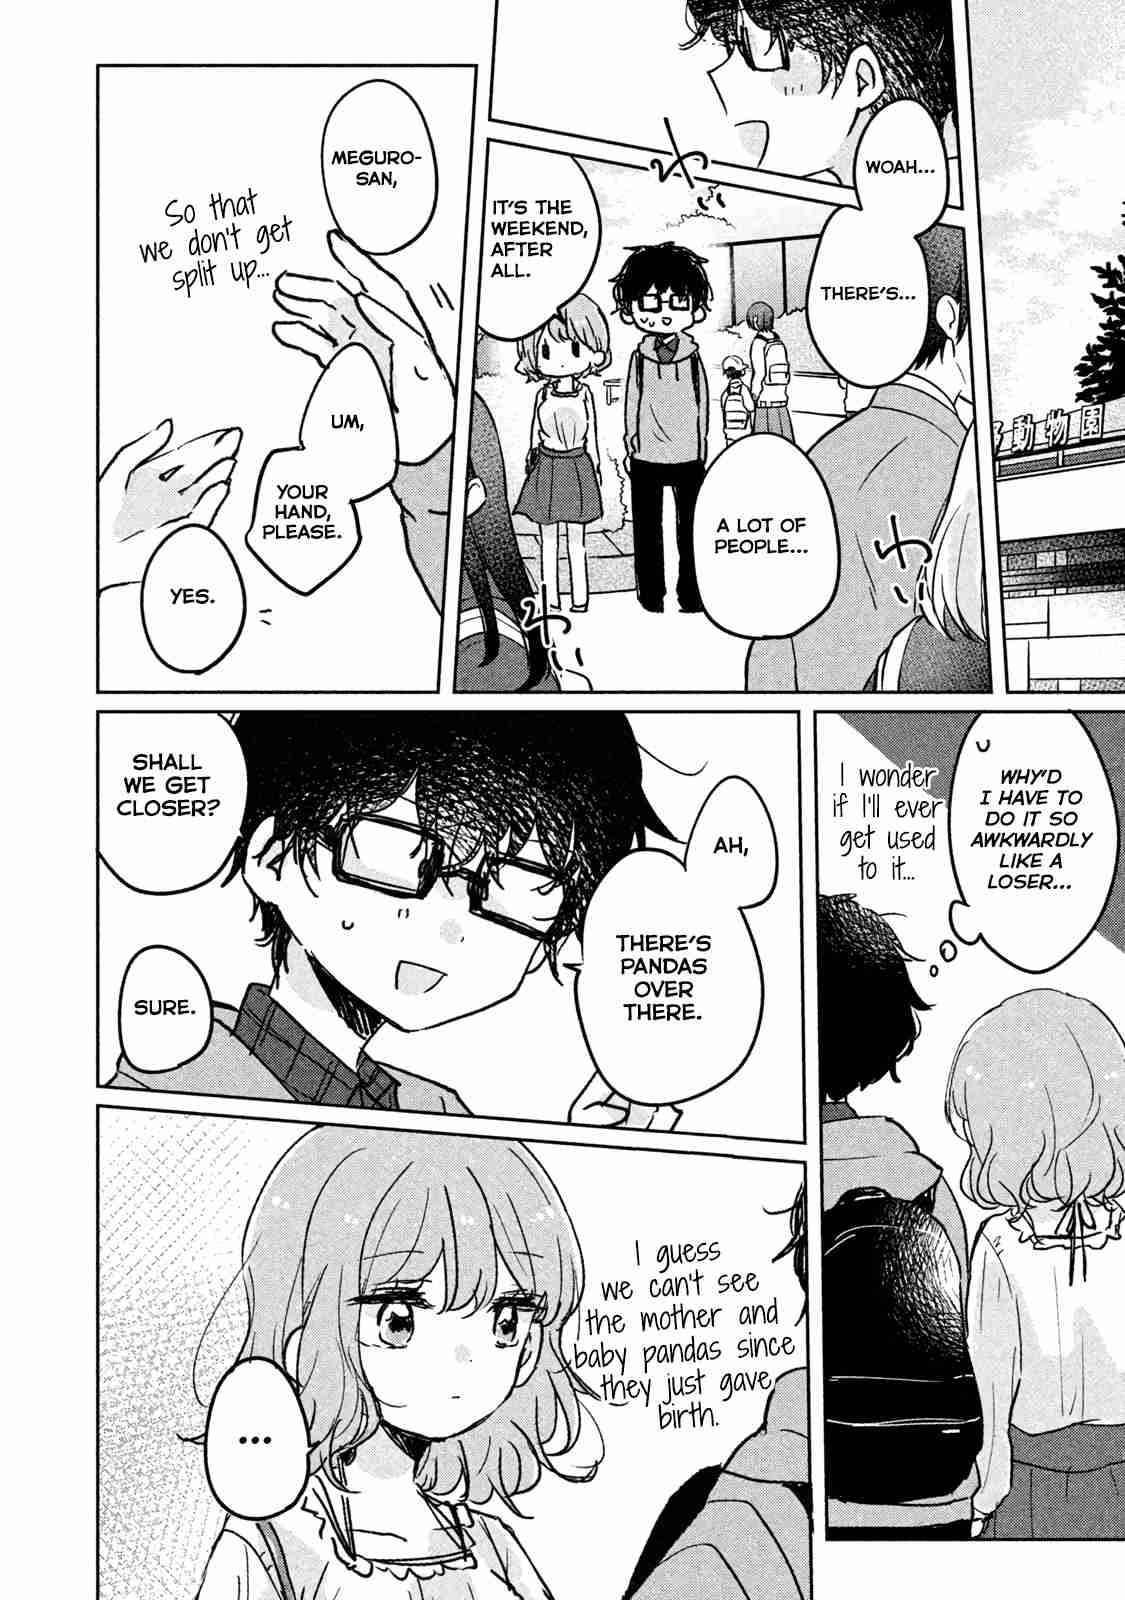 It's Not Meguro san's First Time Vol. 1 Ch. 5 I Can't Compare